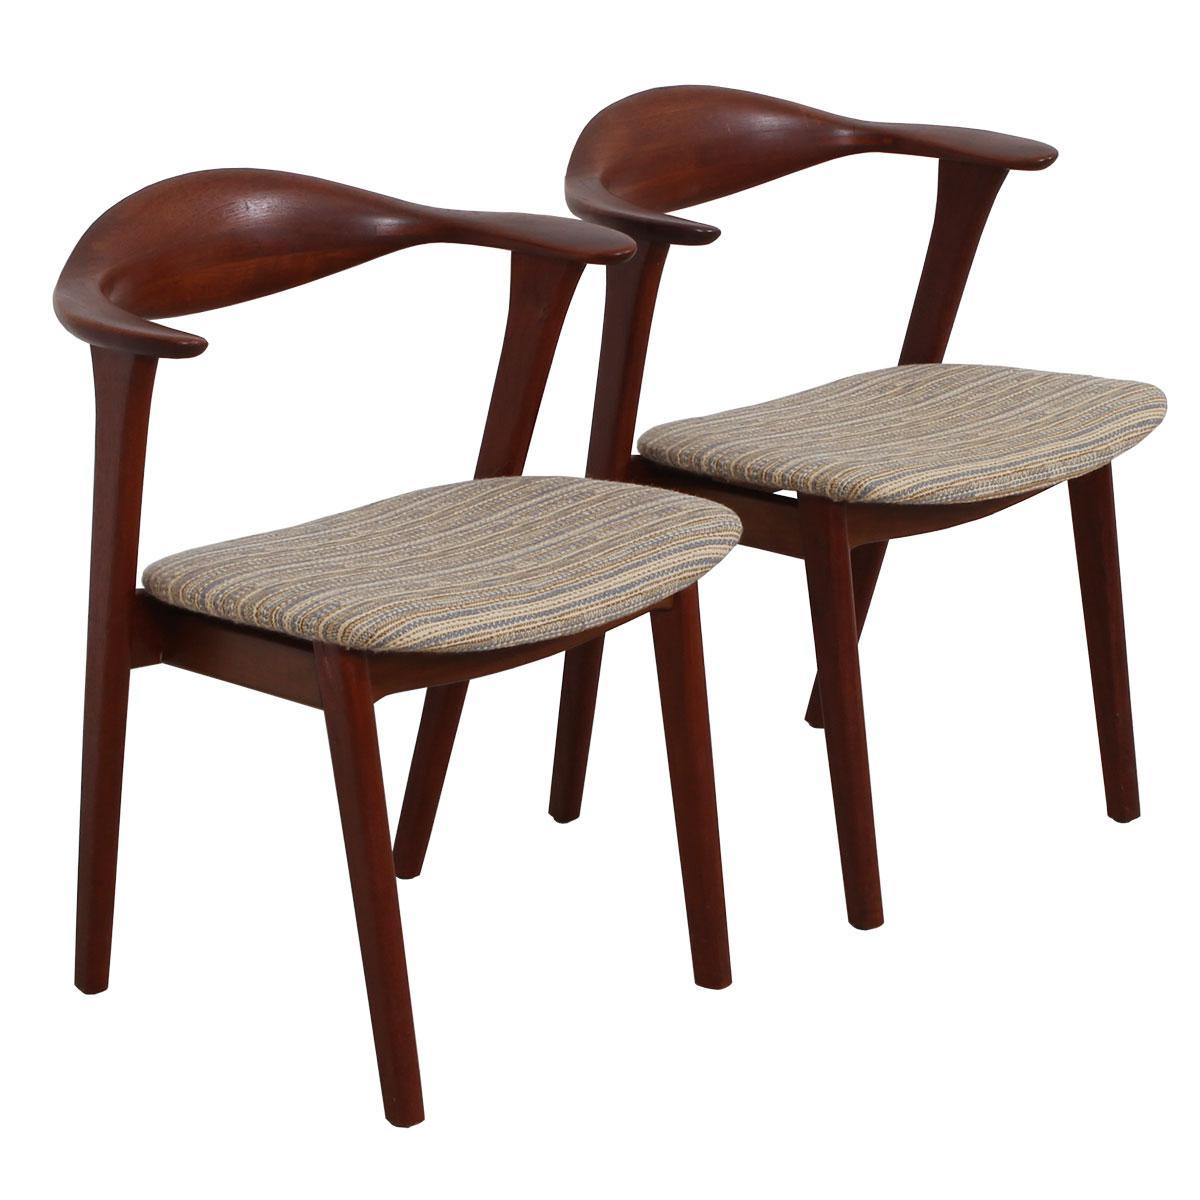 Pair of Danish Modern Teak Arm Chairs by Erik Kirkegaard

Additional information:
Material: Teak, Upholstery
Extraordinary pair of chairs designed by Danish Modern master of design, Erik Kirkegaard, known for chairs that are beautiful to look